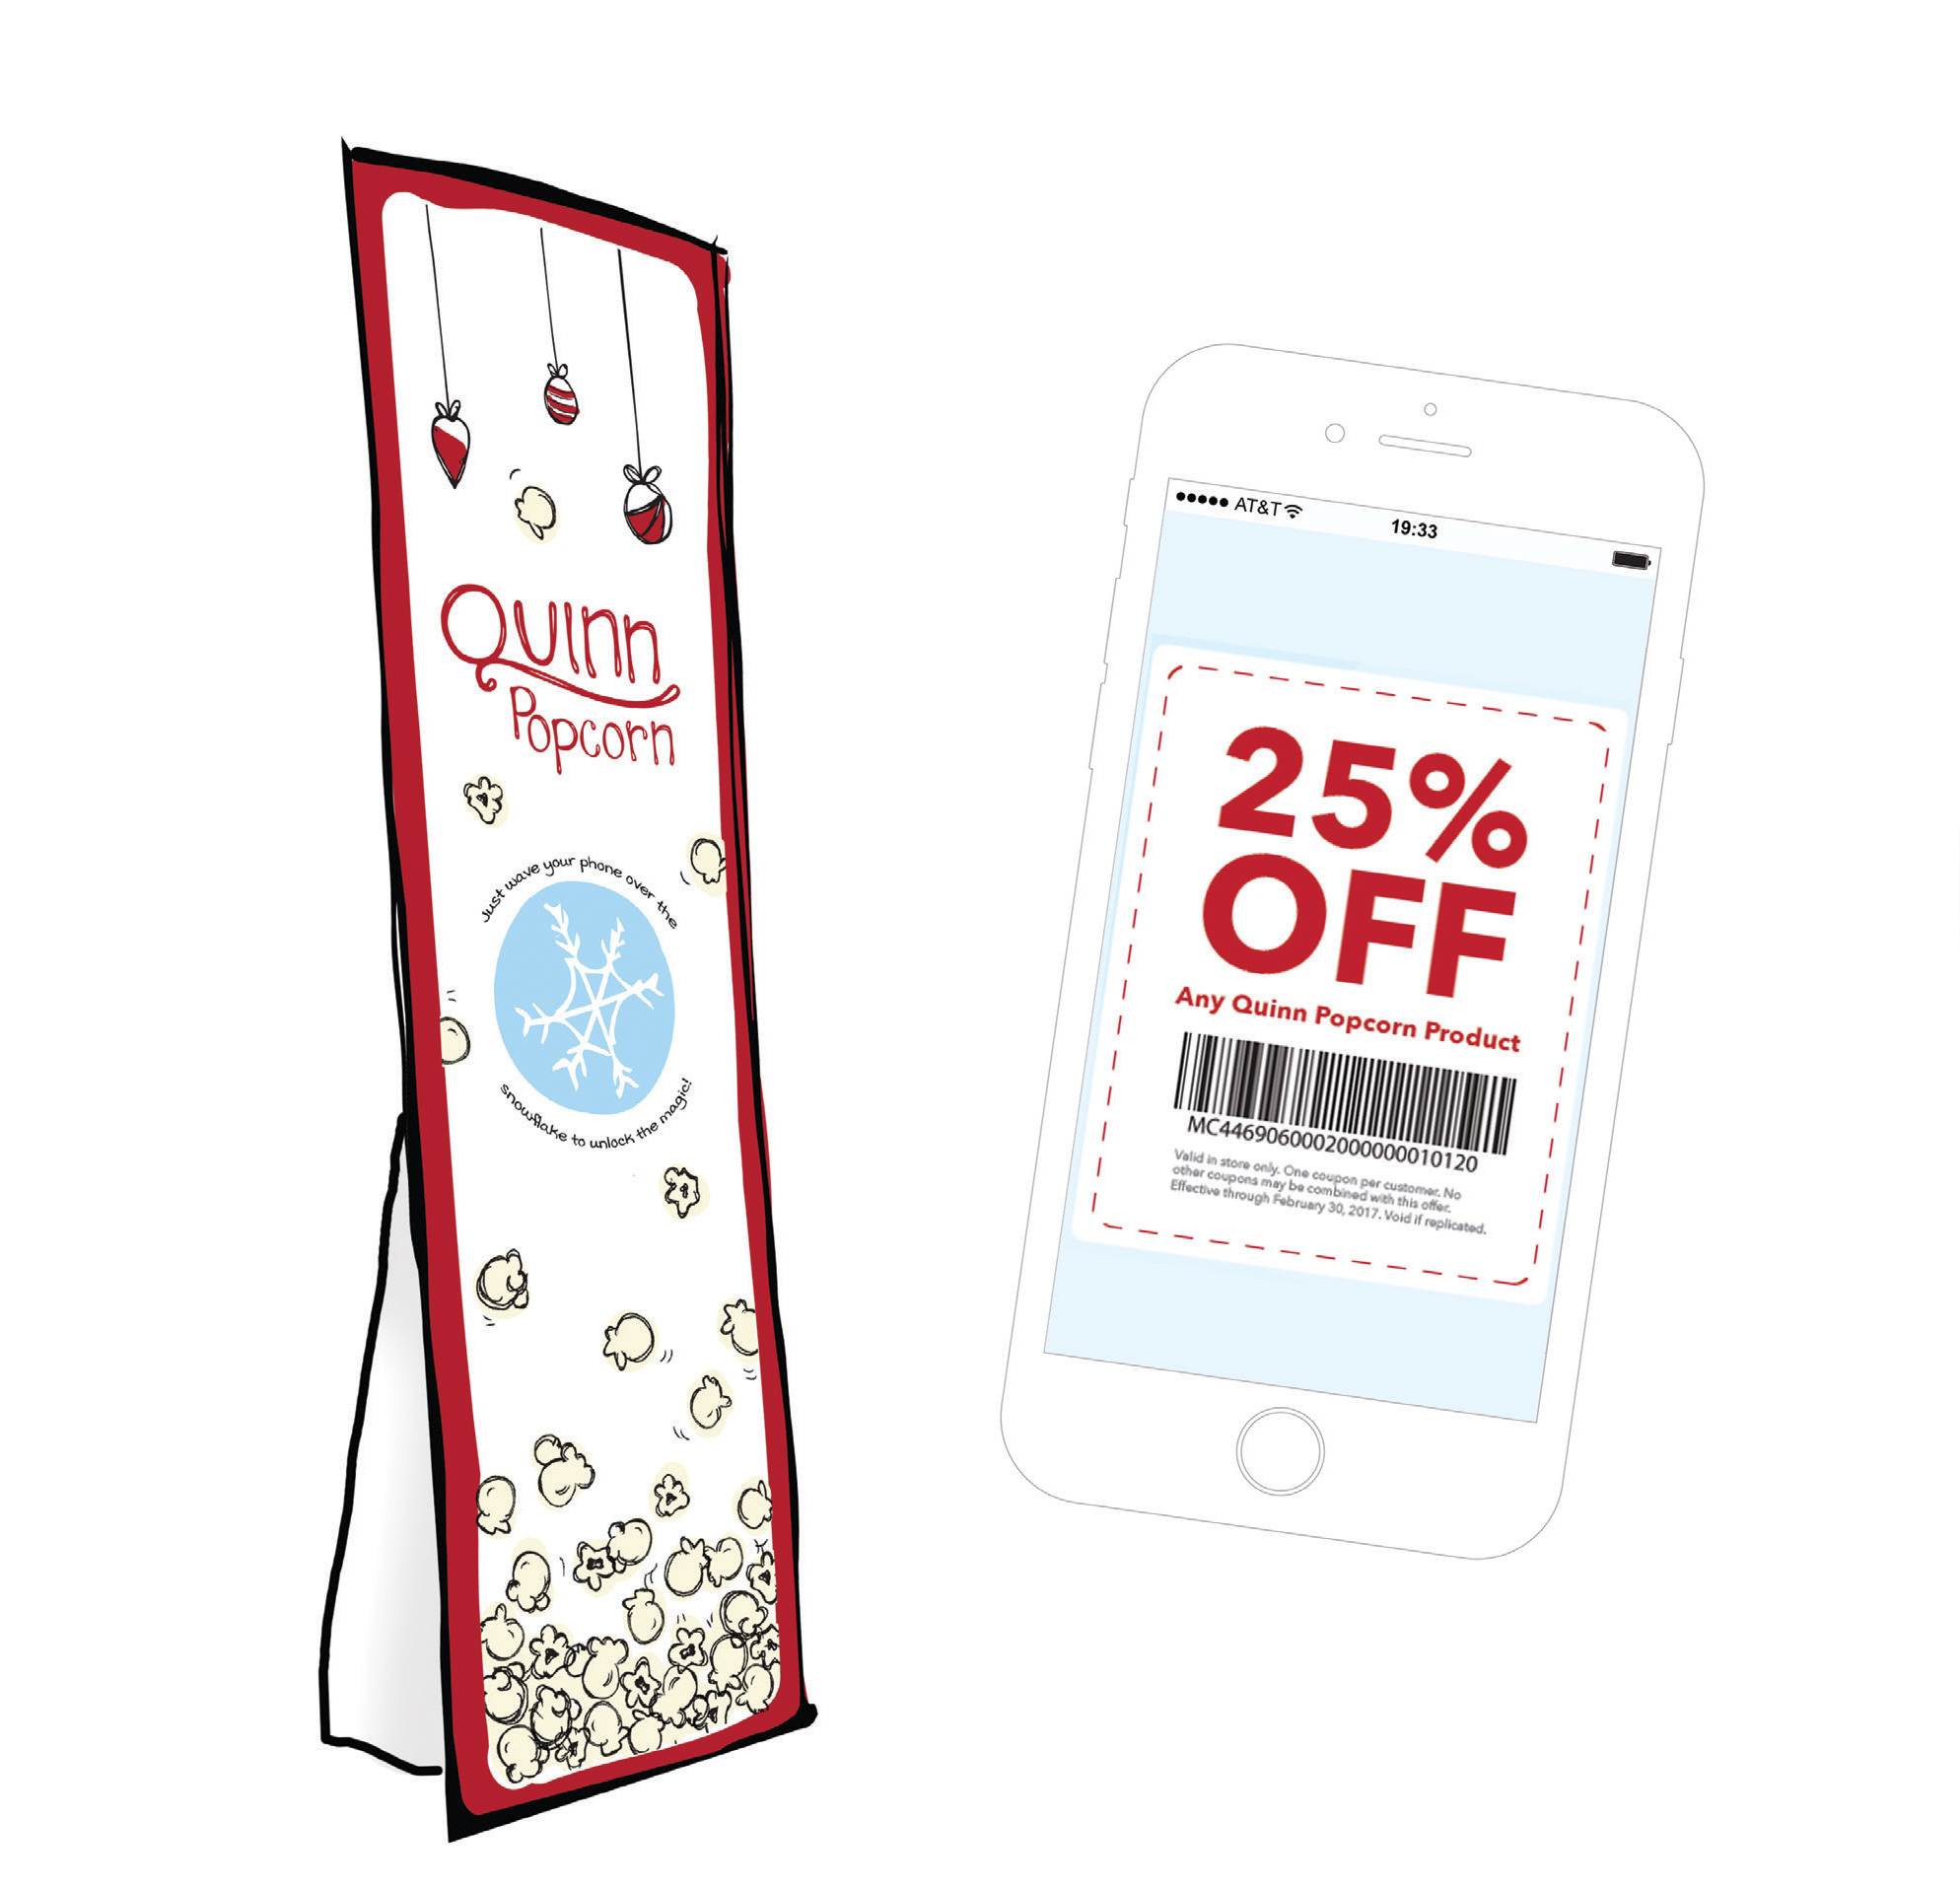   Point of Sale : In the popcorn aisle, you can find another gift from Quinn and a link to their Feed Family Time microsite.   